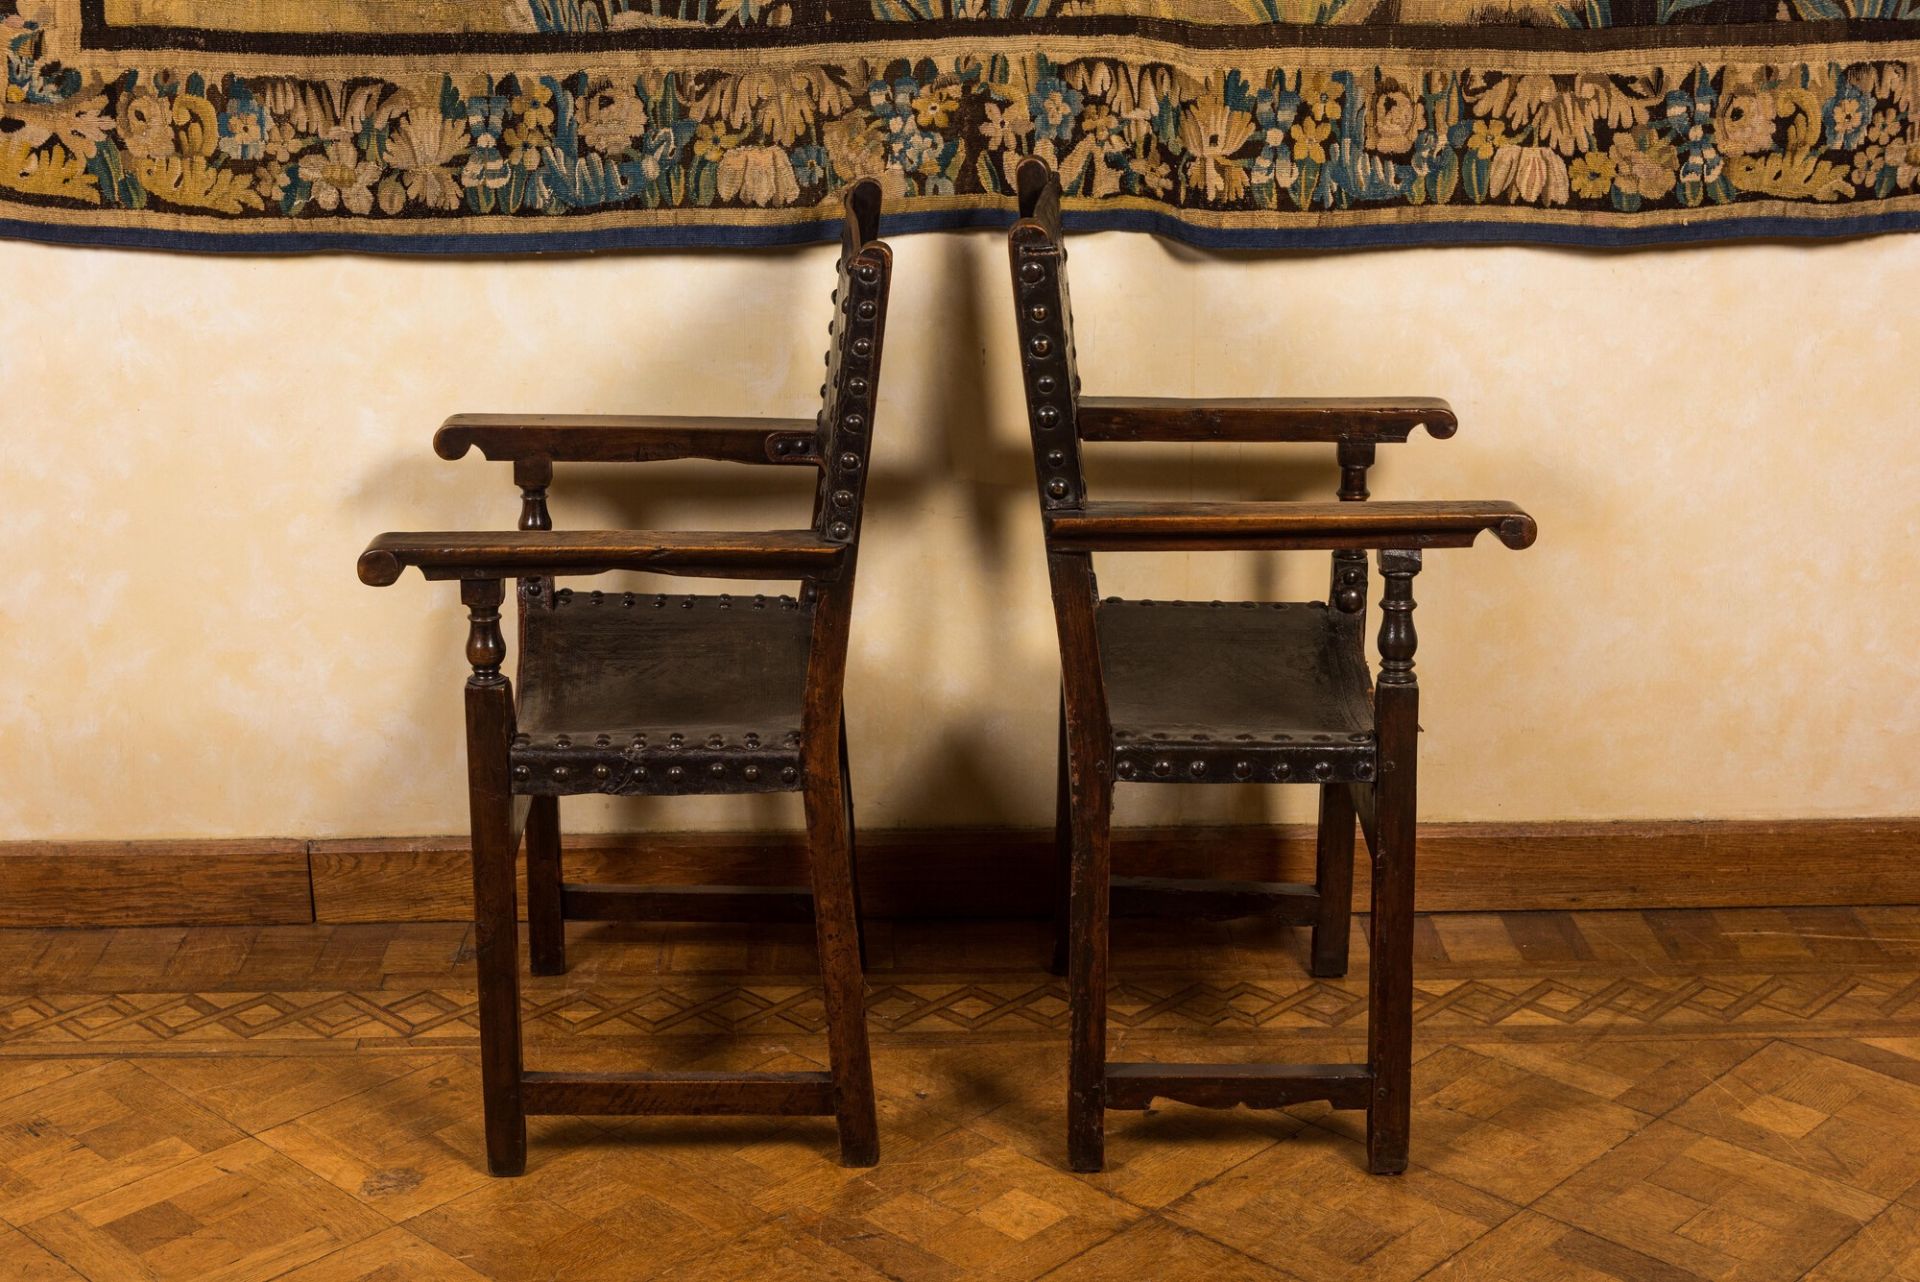 A pair of Spanish walnut chairs with leather backs and seats, 17th C. - Bild 2 aus 4